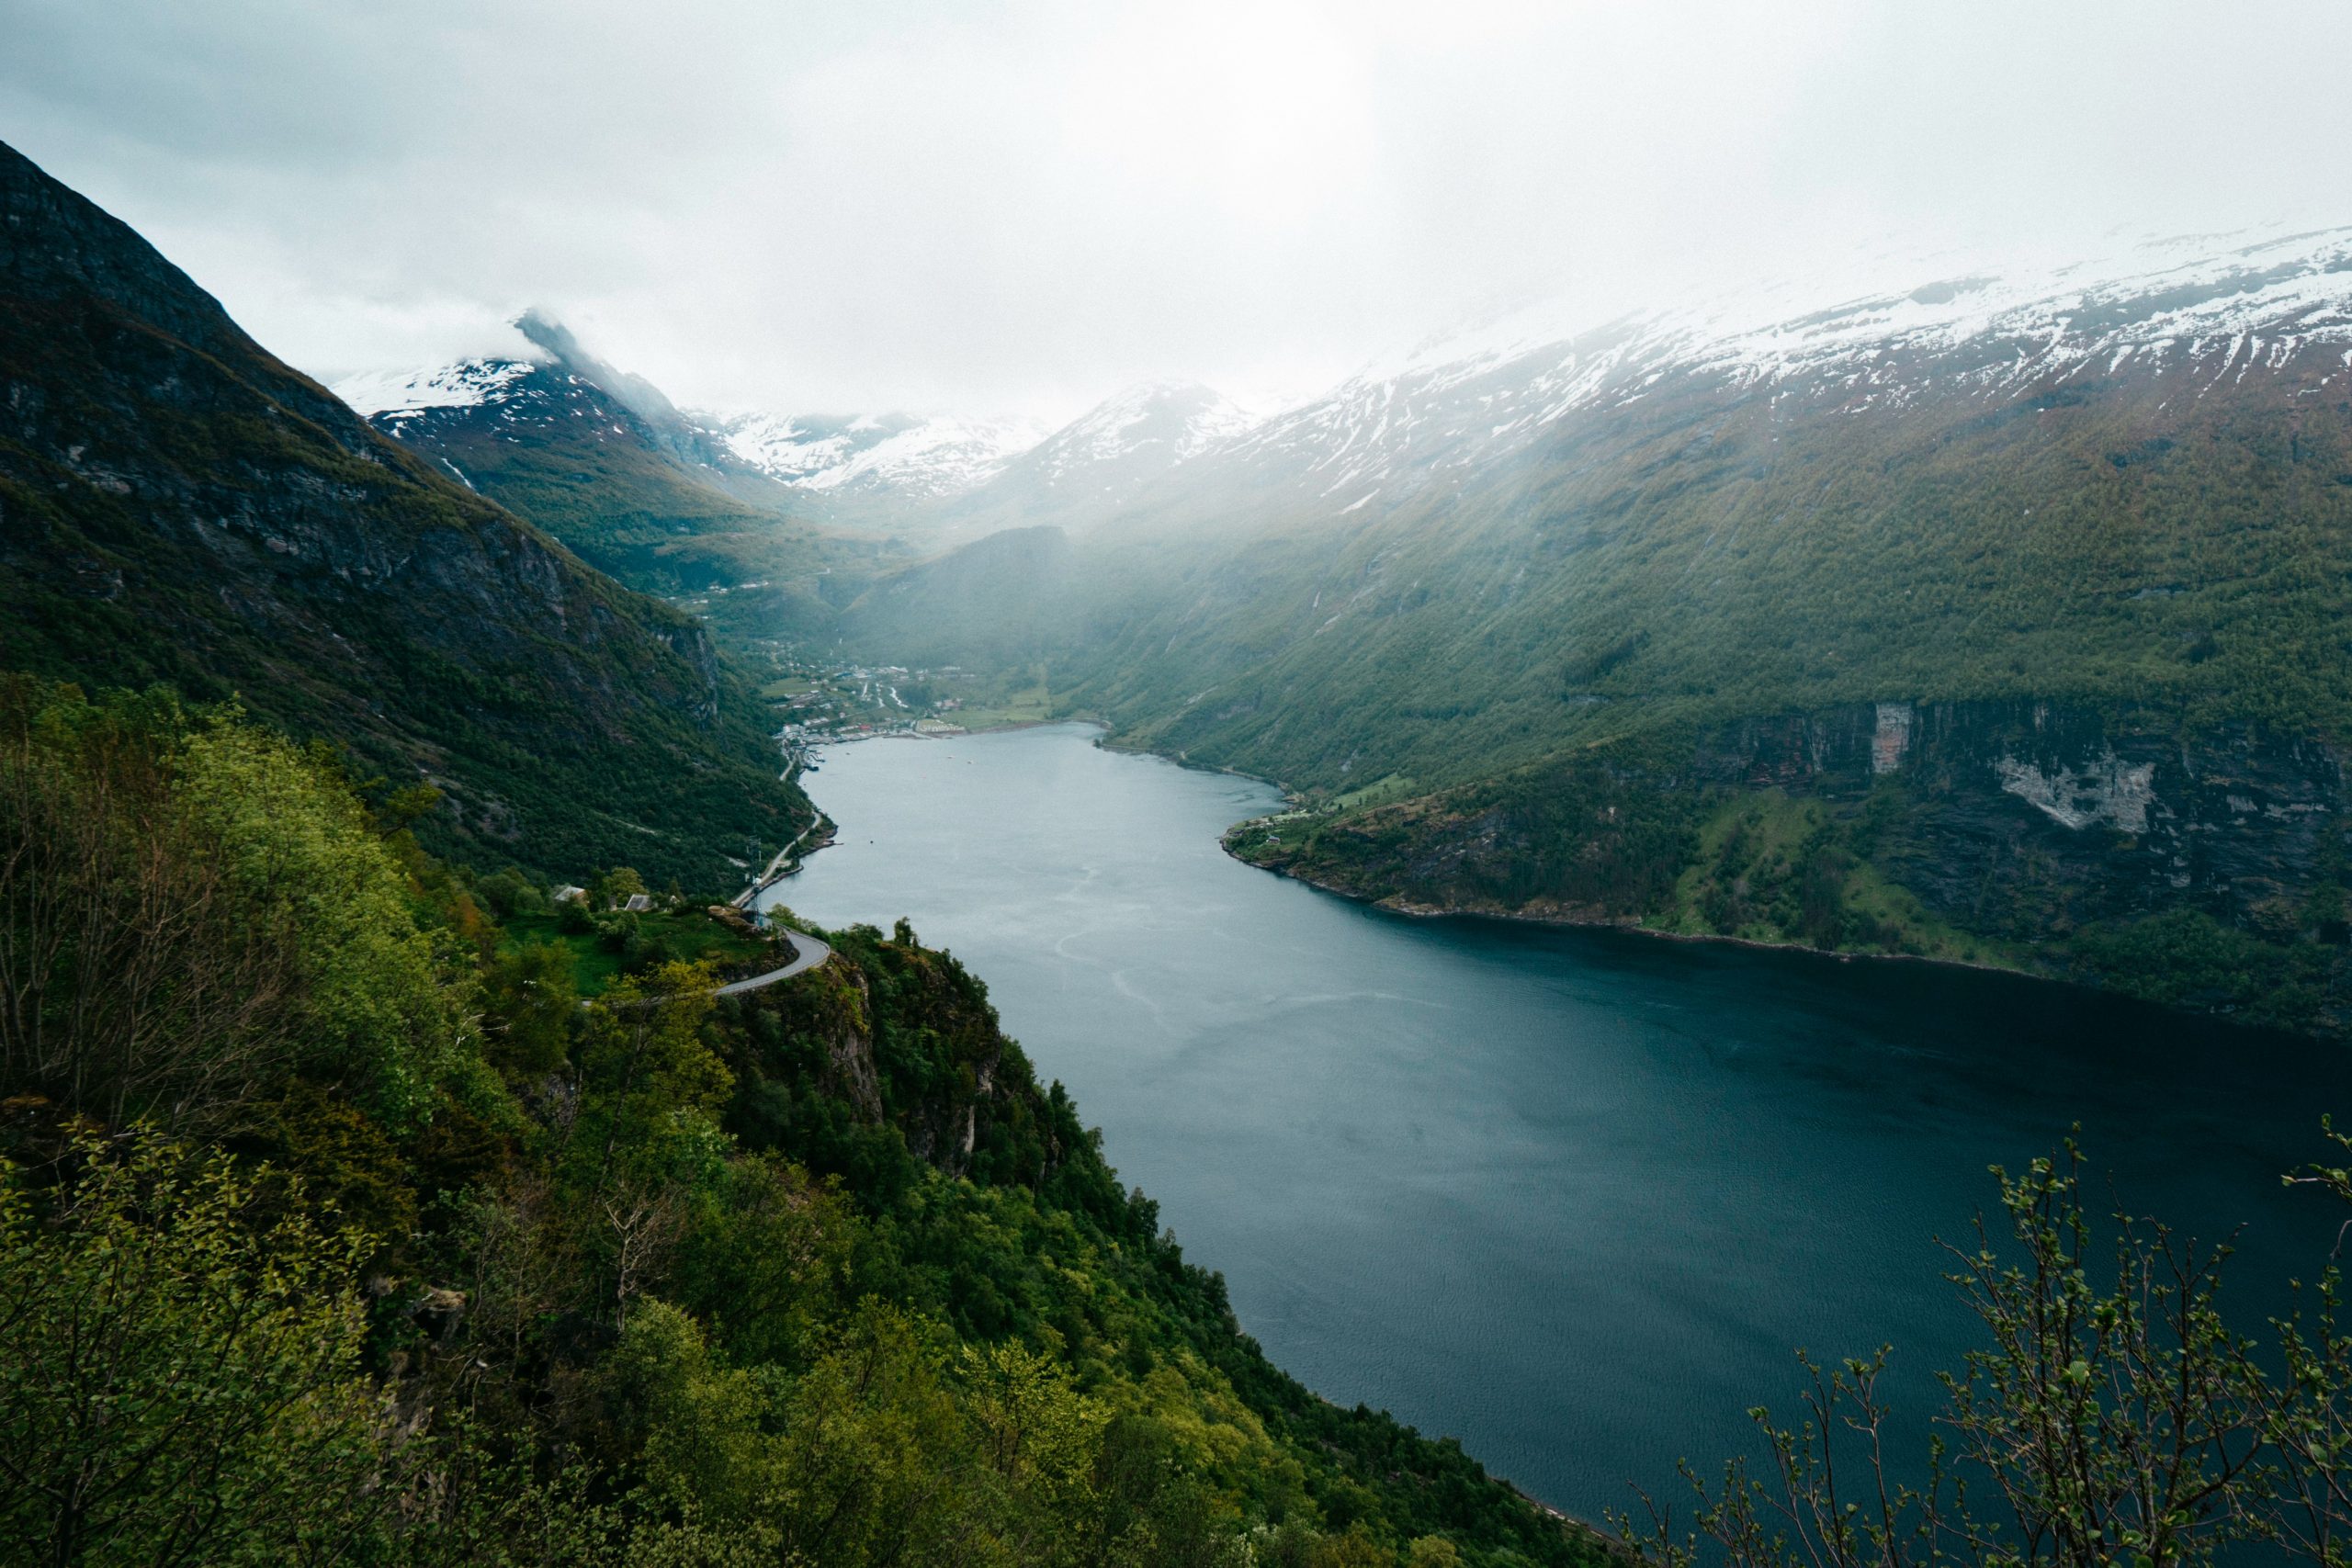 explore the stunning fjords of norway and immerse yourself in the breathtaking natural beauty of the nordic landscapes.